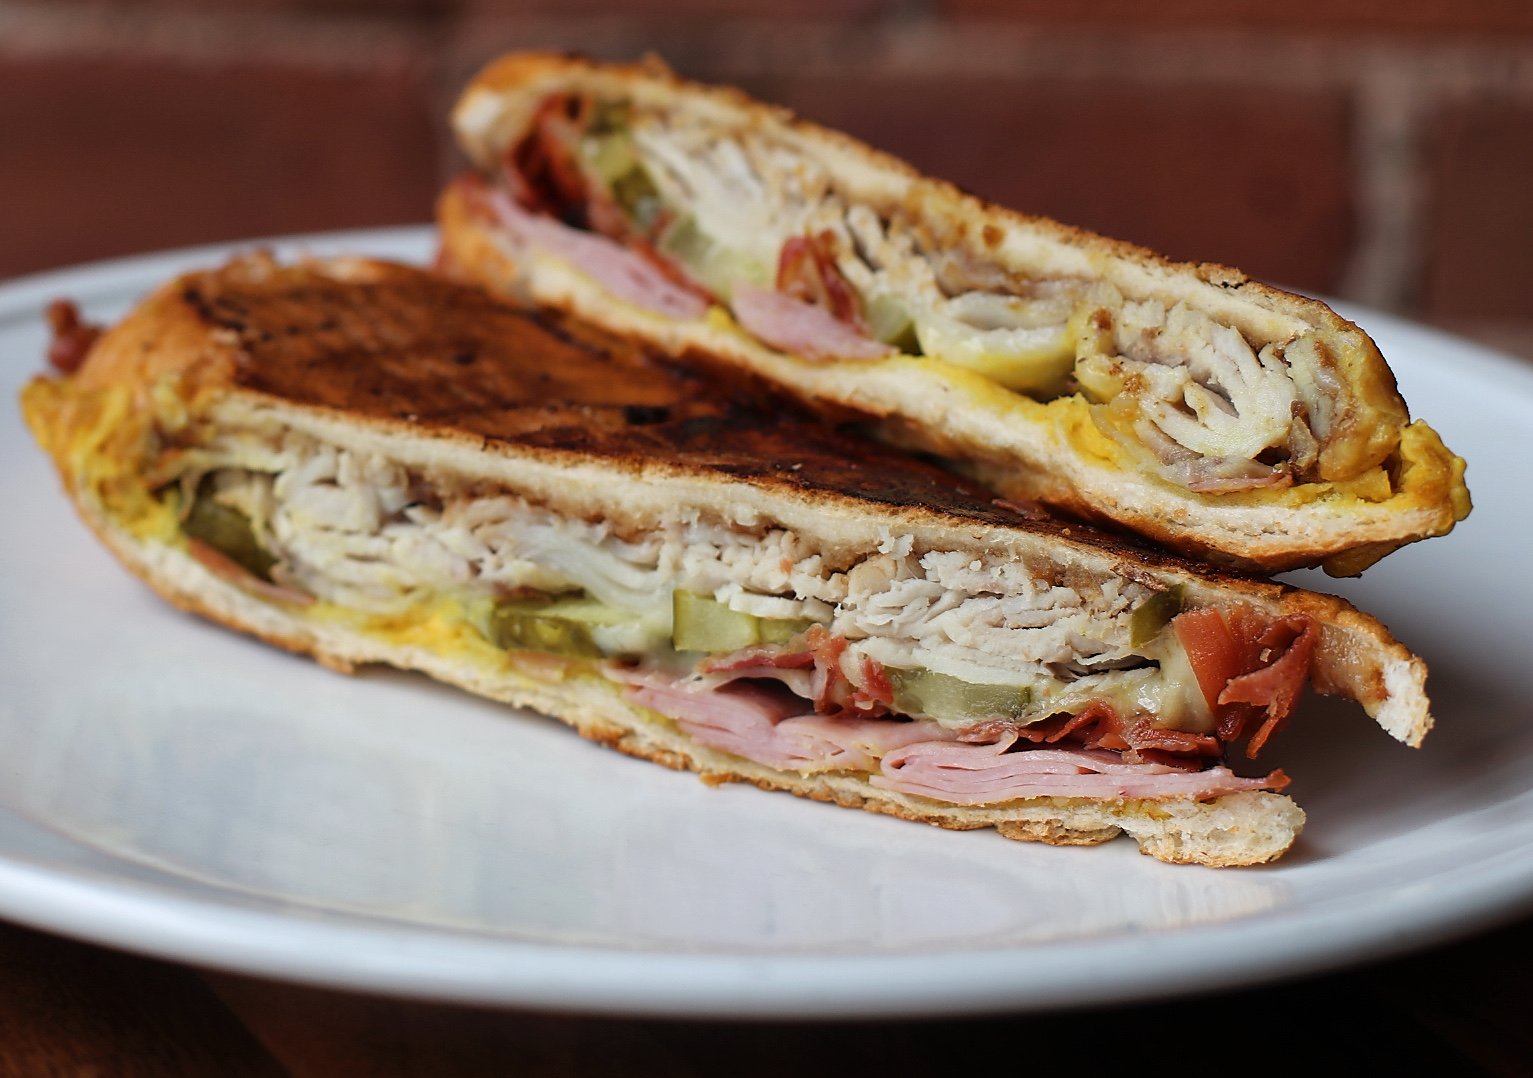 The Cubano Sandwiches from Chef